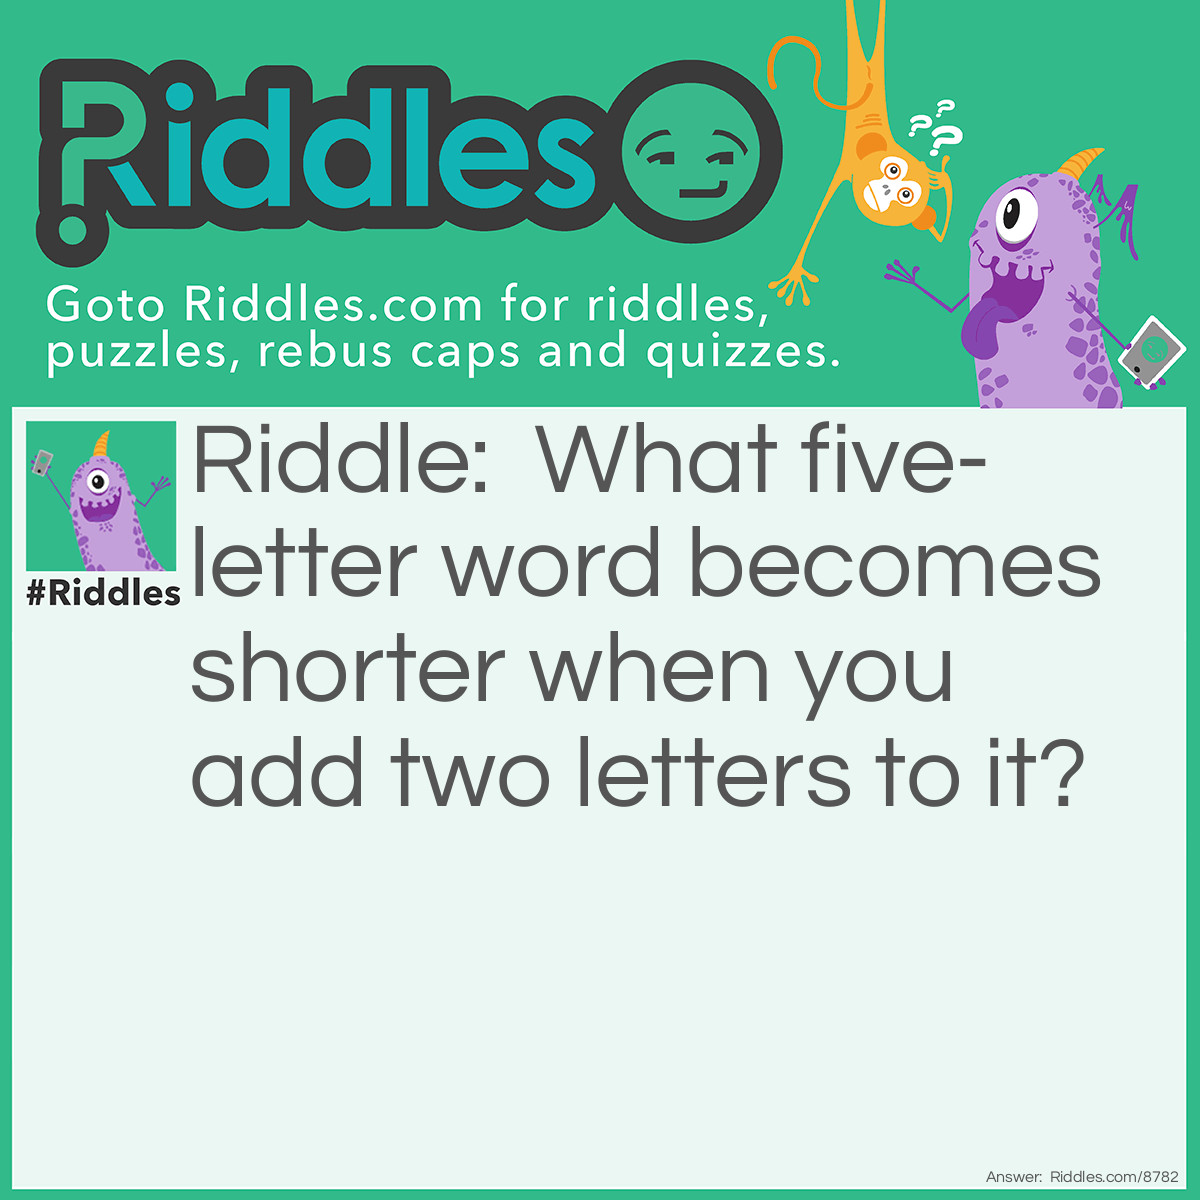 Riddle: What five-letter word becomes shorter when you add two letters to it? Answer: Short (Short+er) Come on this was an easy one